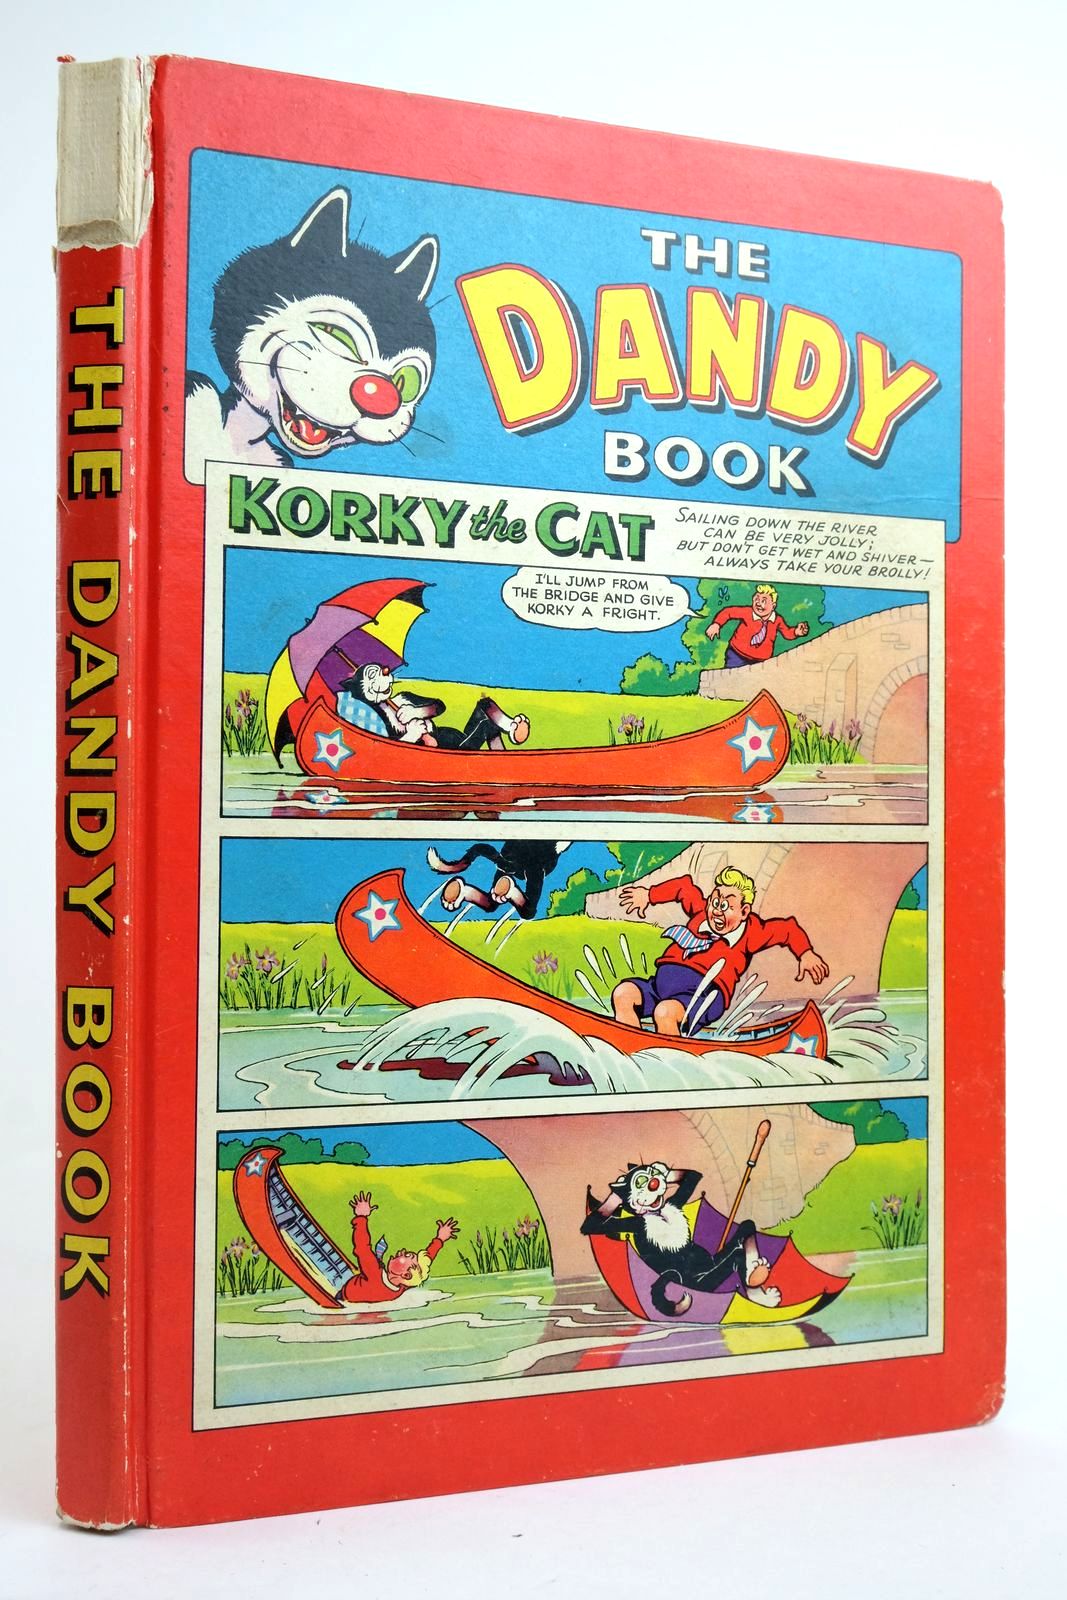 Photo of THE DANDY BOOK 1959 published by D.C. Thomson &amp; Co Ltd. (STOCK CODE: 2135743)  for sale by Stella & Rose's Books